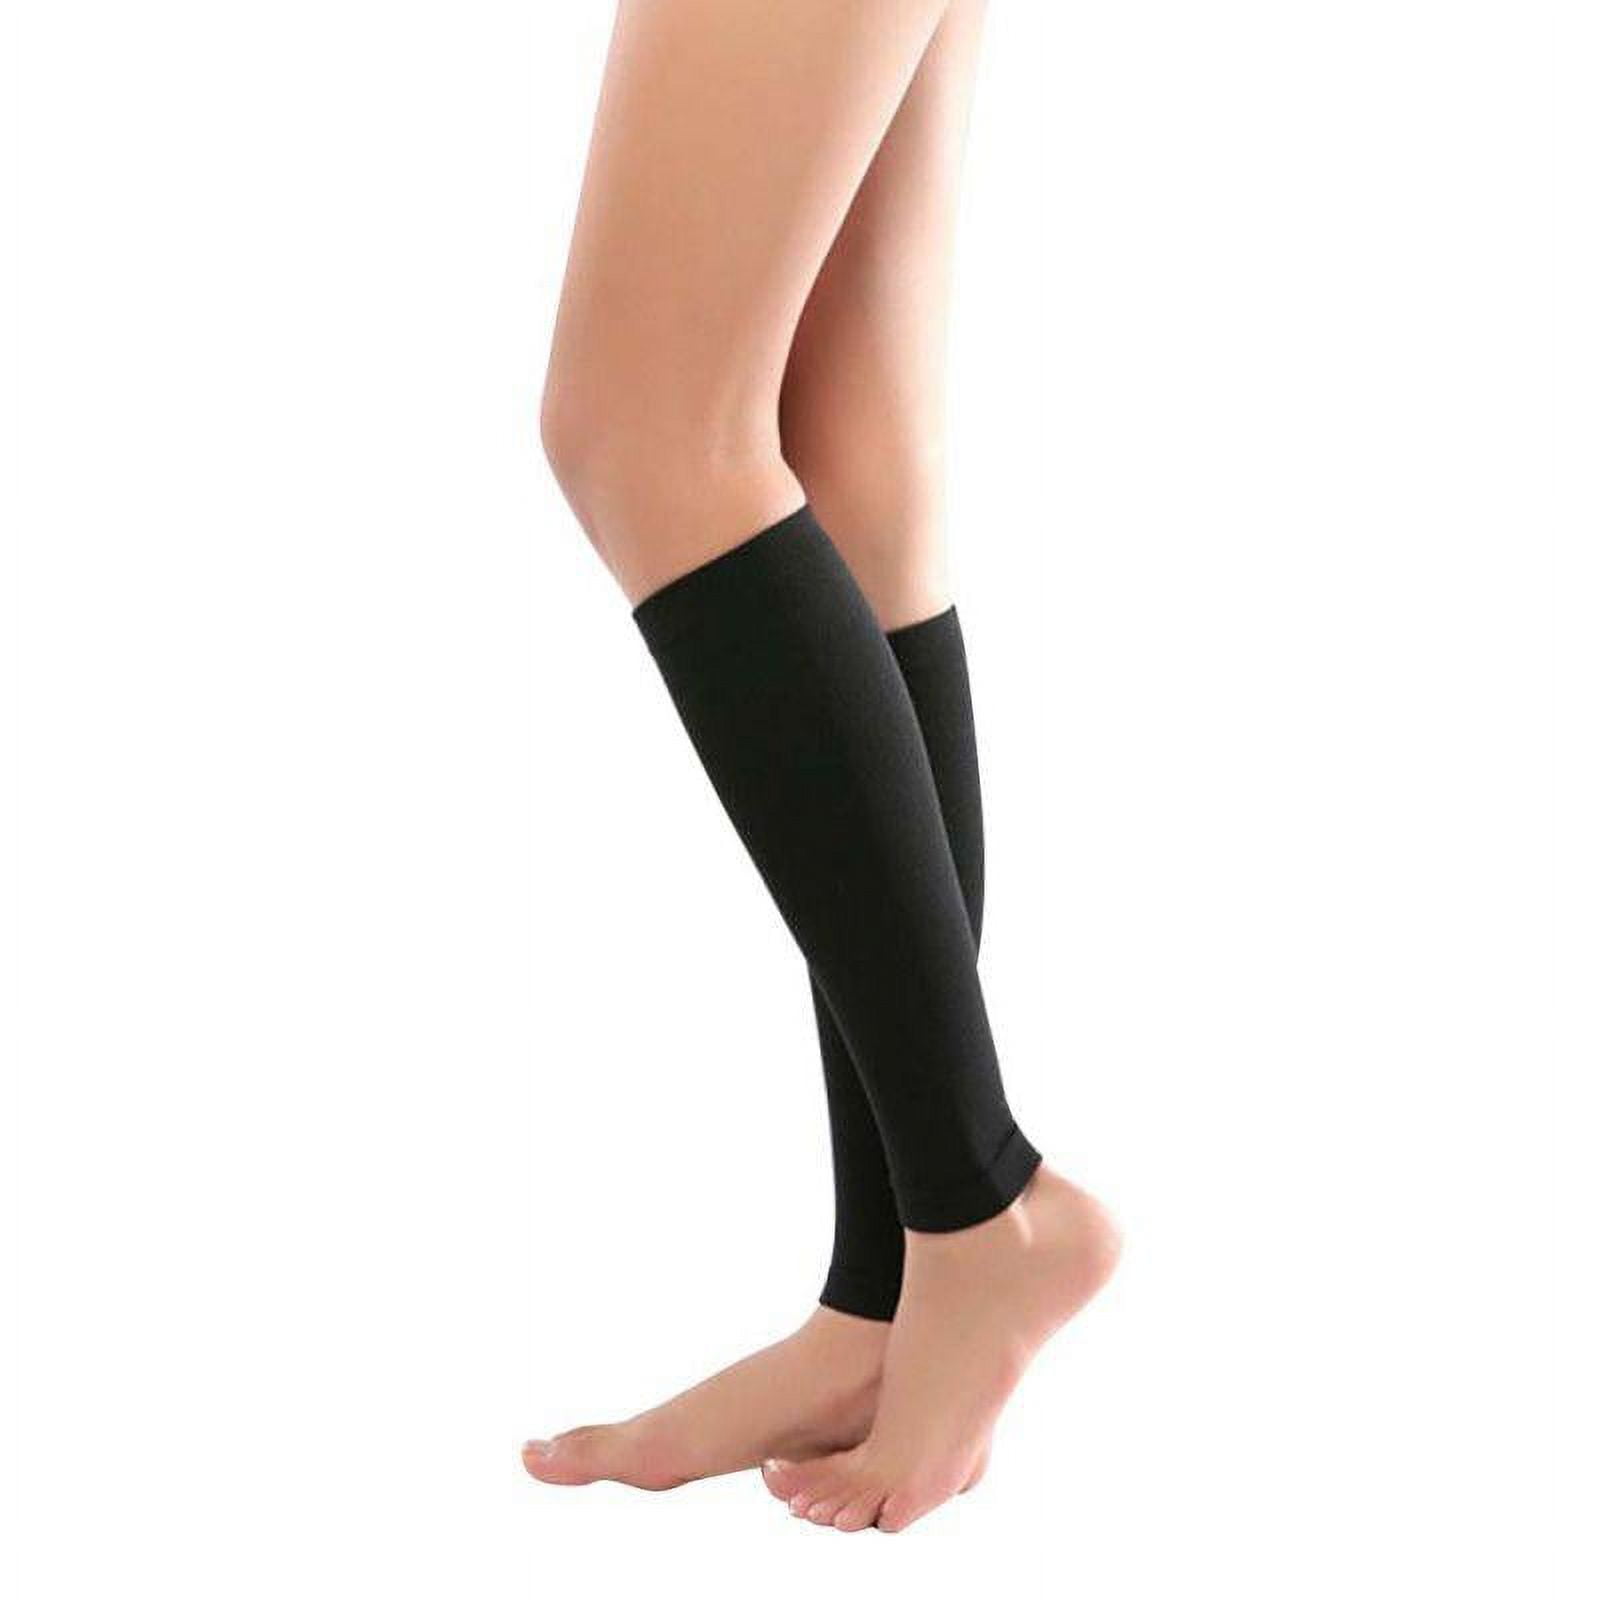  VARCOH Compression Socks for Women, Compression Leggings for  Women, Medical Compression Stockings Best for DVT, Pregnancy, Varicose Veins,  Relief Shin Splints, Edema : Clothing, Shoes & Jewelry